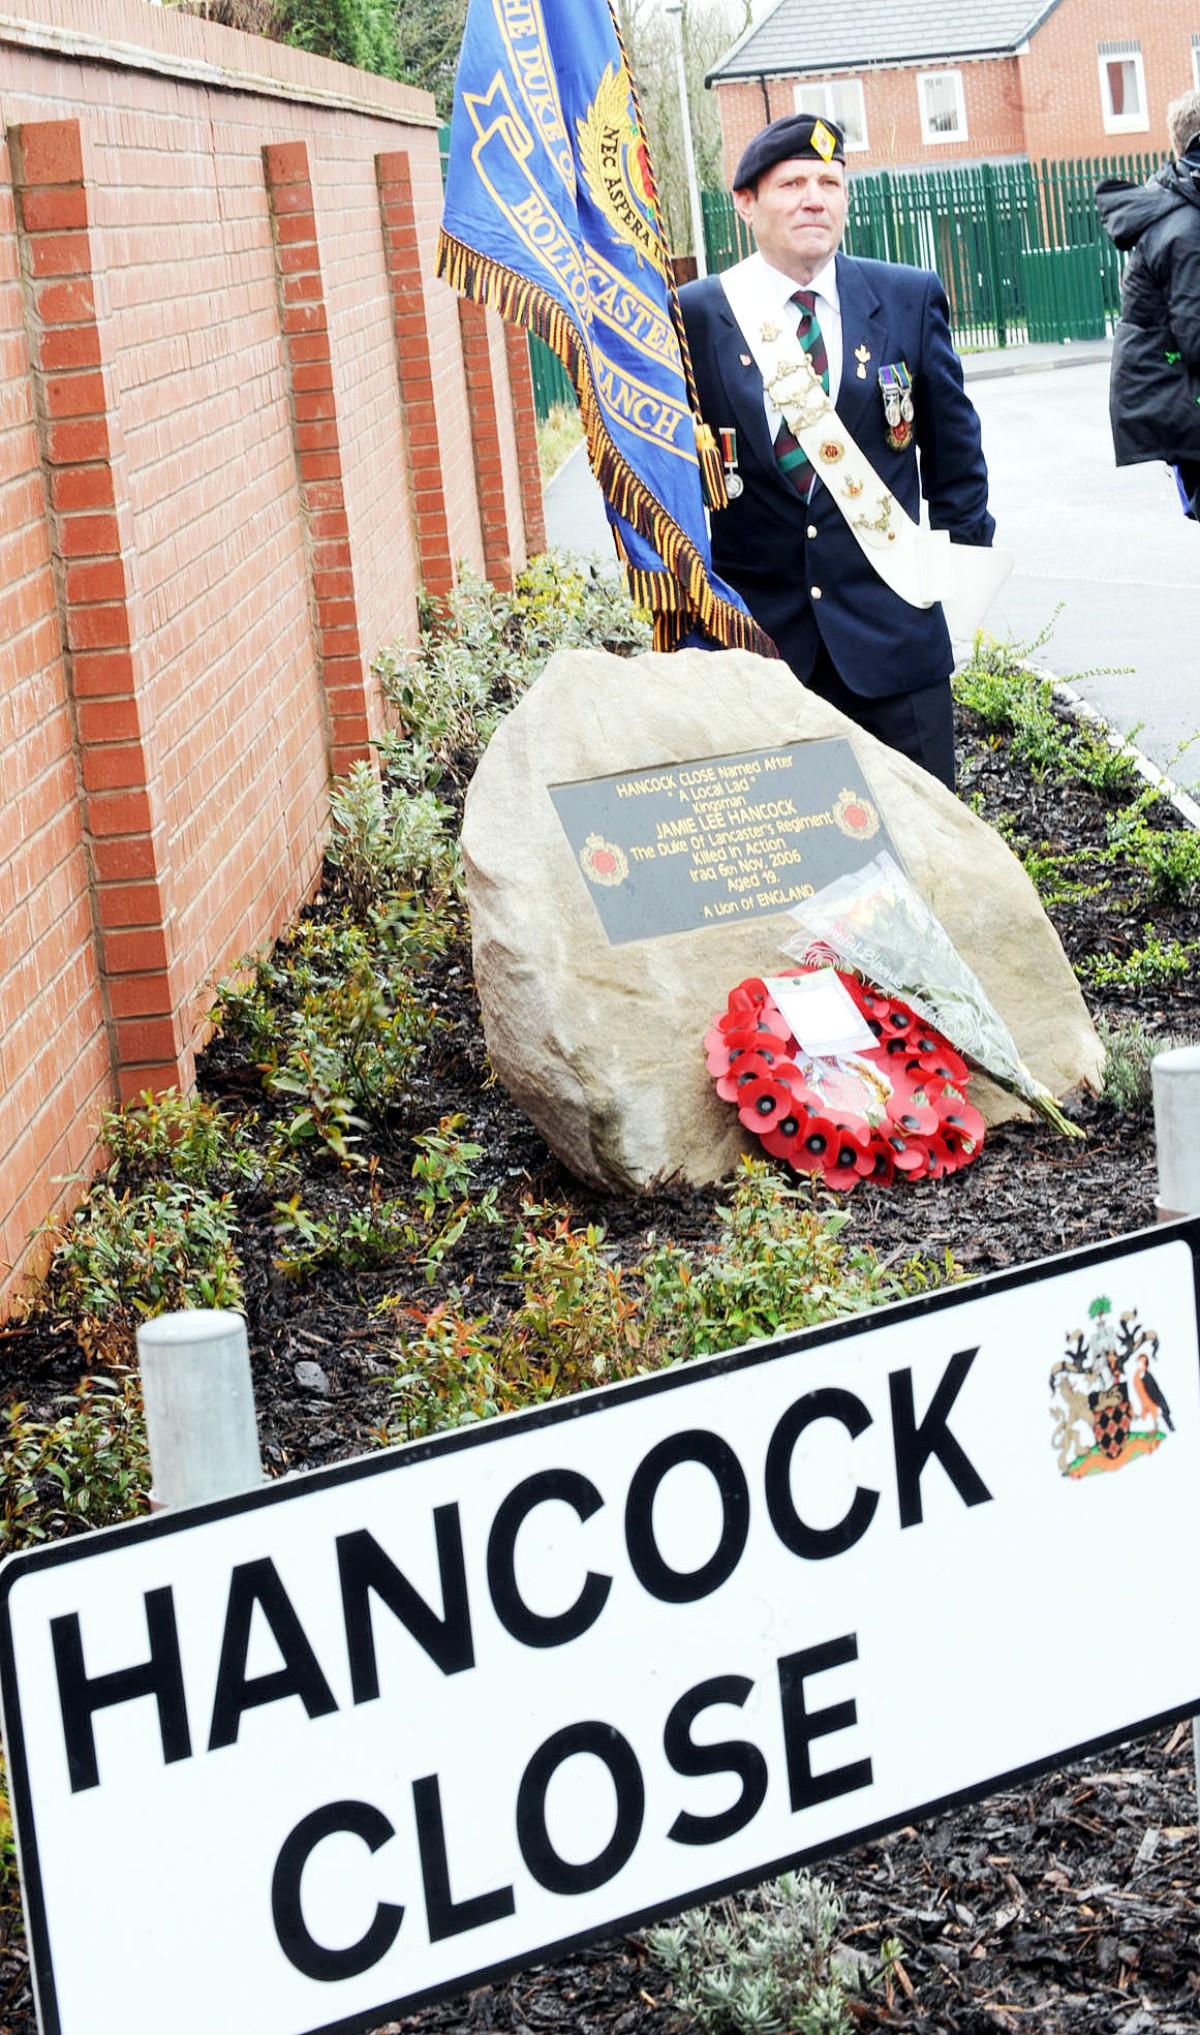 A memorial stone was unveiled at Hancock Close to honour fallen soldier Jamie Hancock